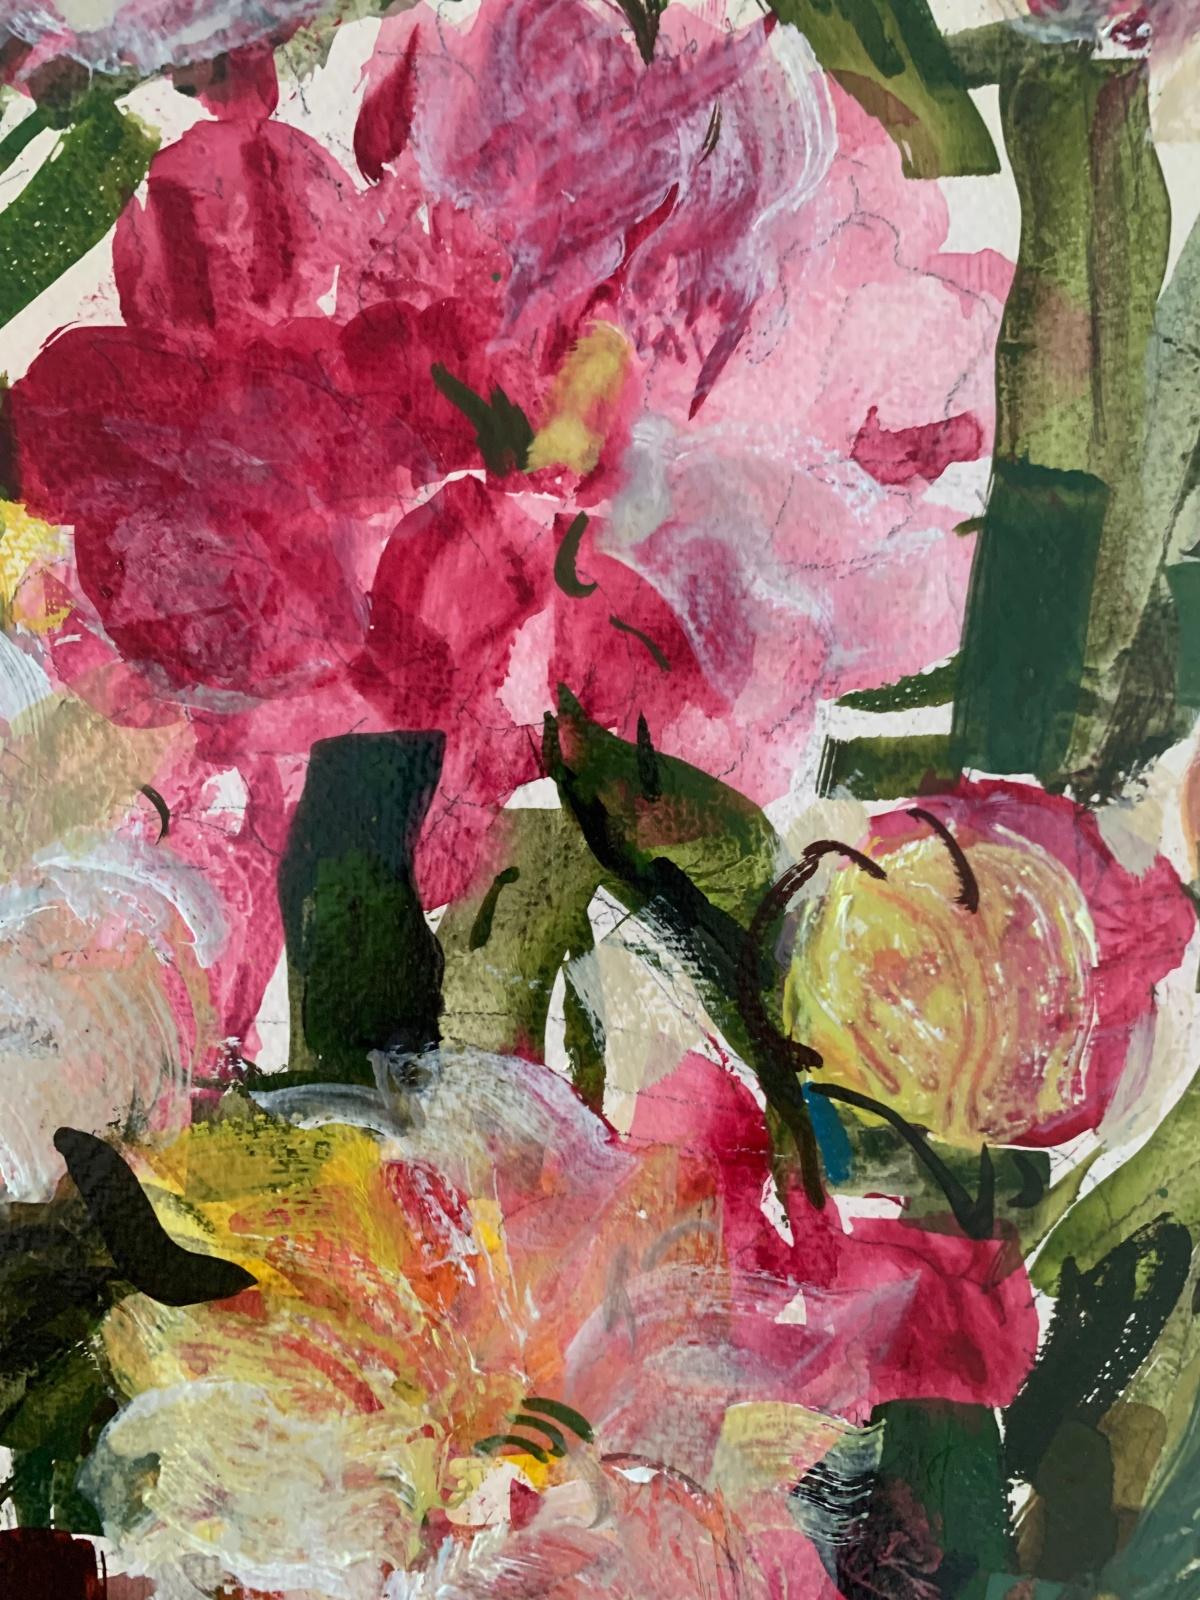 Contemporary floral still life figurative gouache on cardboard painting by Polish artist Bozena Lesiak. Colors are vibrant with pink and green.

BOŻENA LESIAK (born in 1952) Studied at the faculty of painting at the Academy of Fine Arts in Cracow